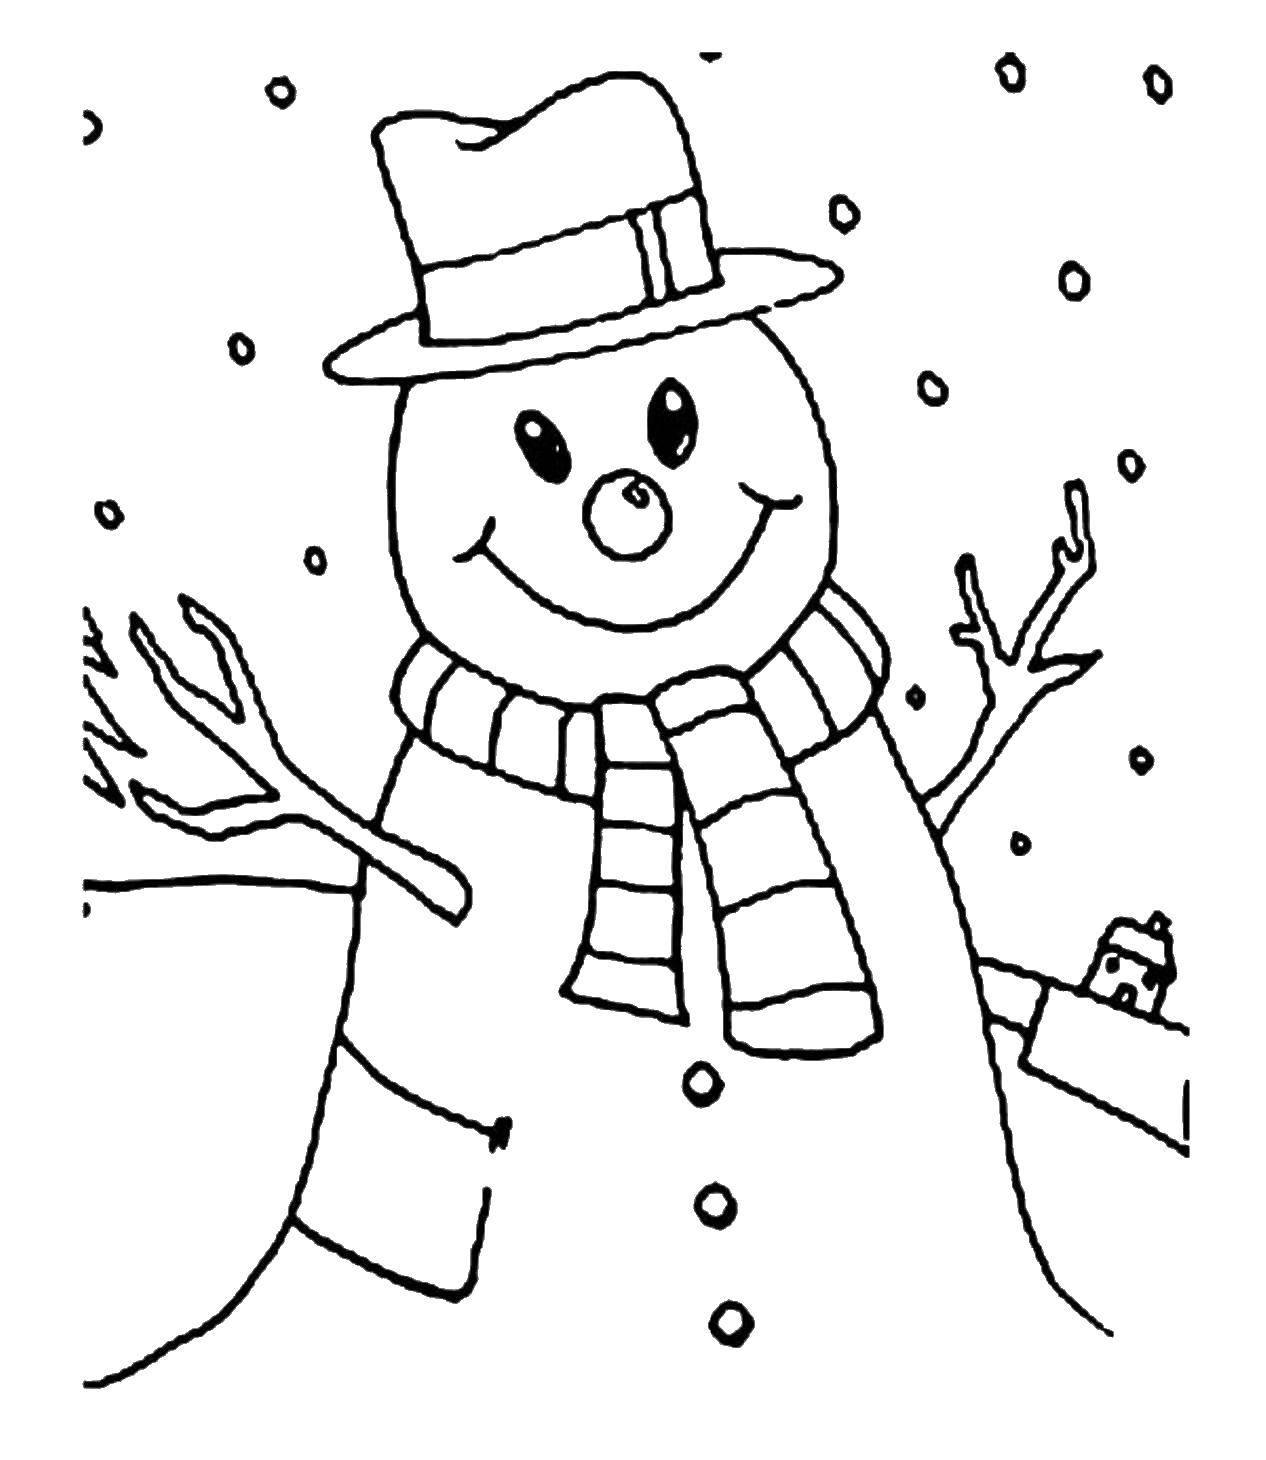 Coloring A snowman in the snow. Category coloring. Tags:  snowfall, snowman.